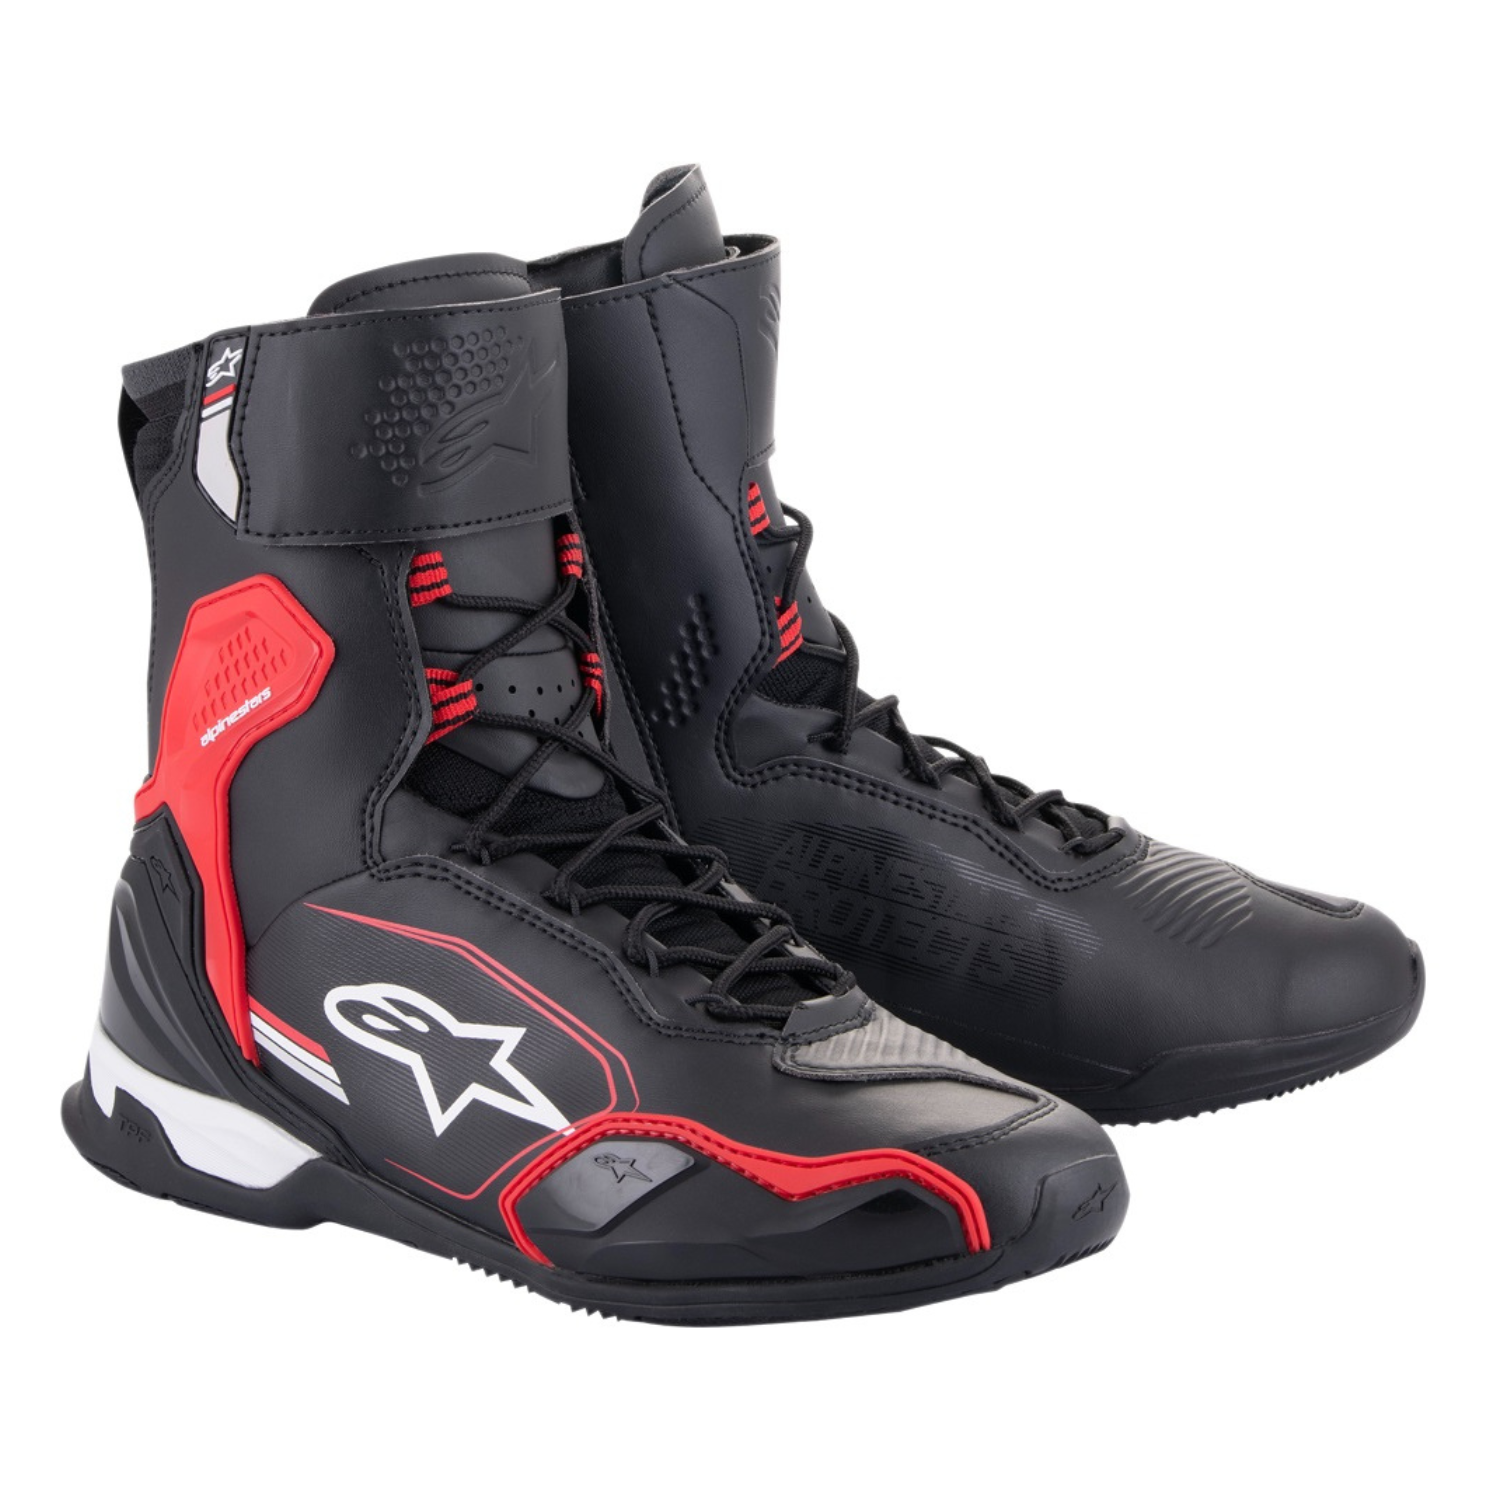 Image of Alpinestars Superfaster Shoes Black Bright Red White Taille US 85